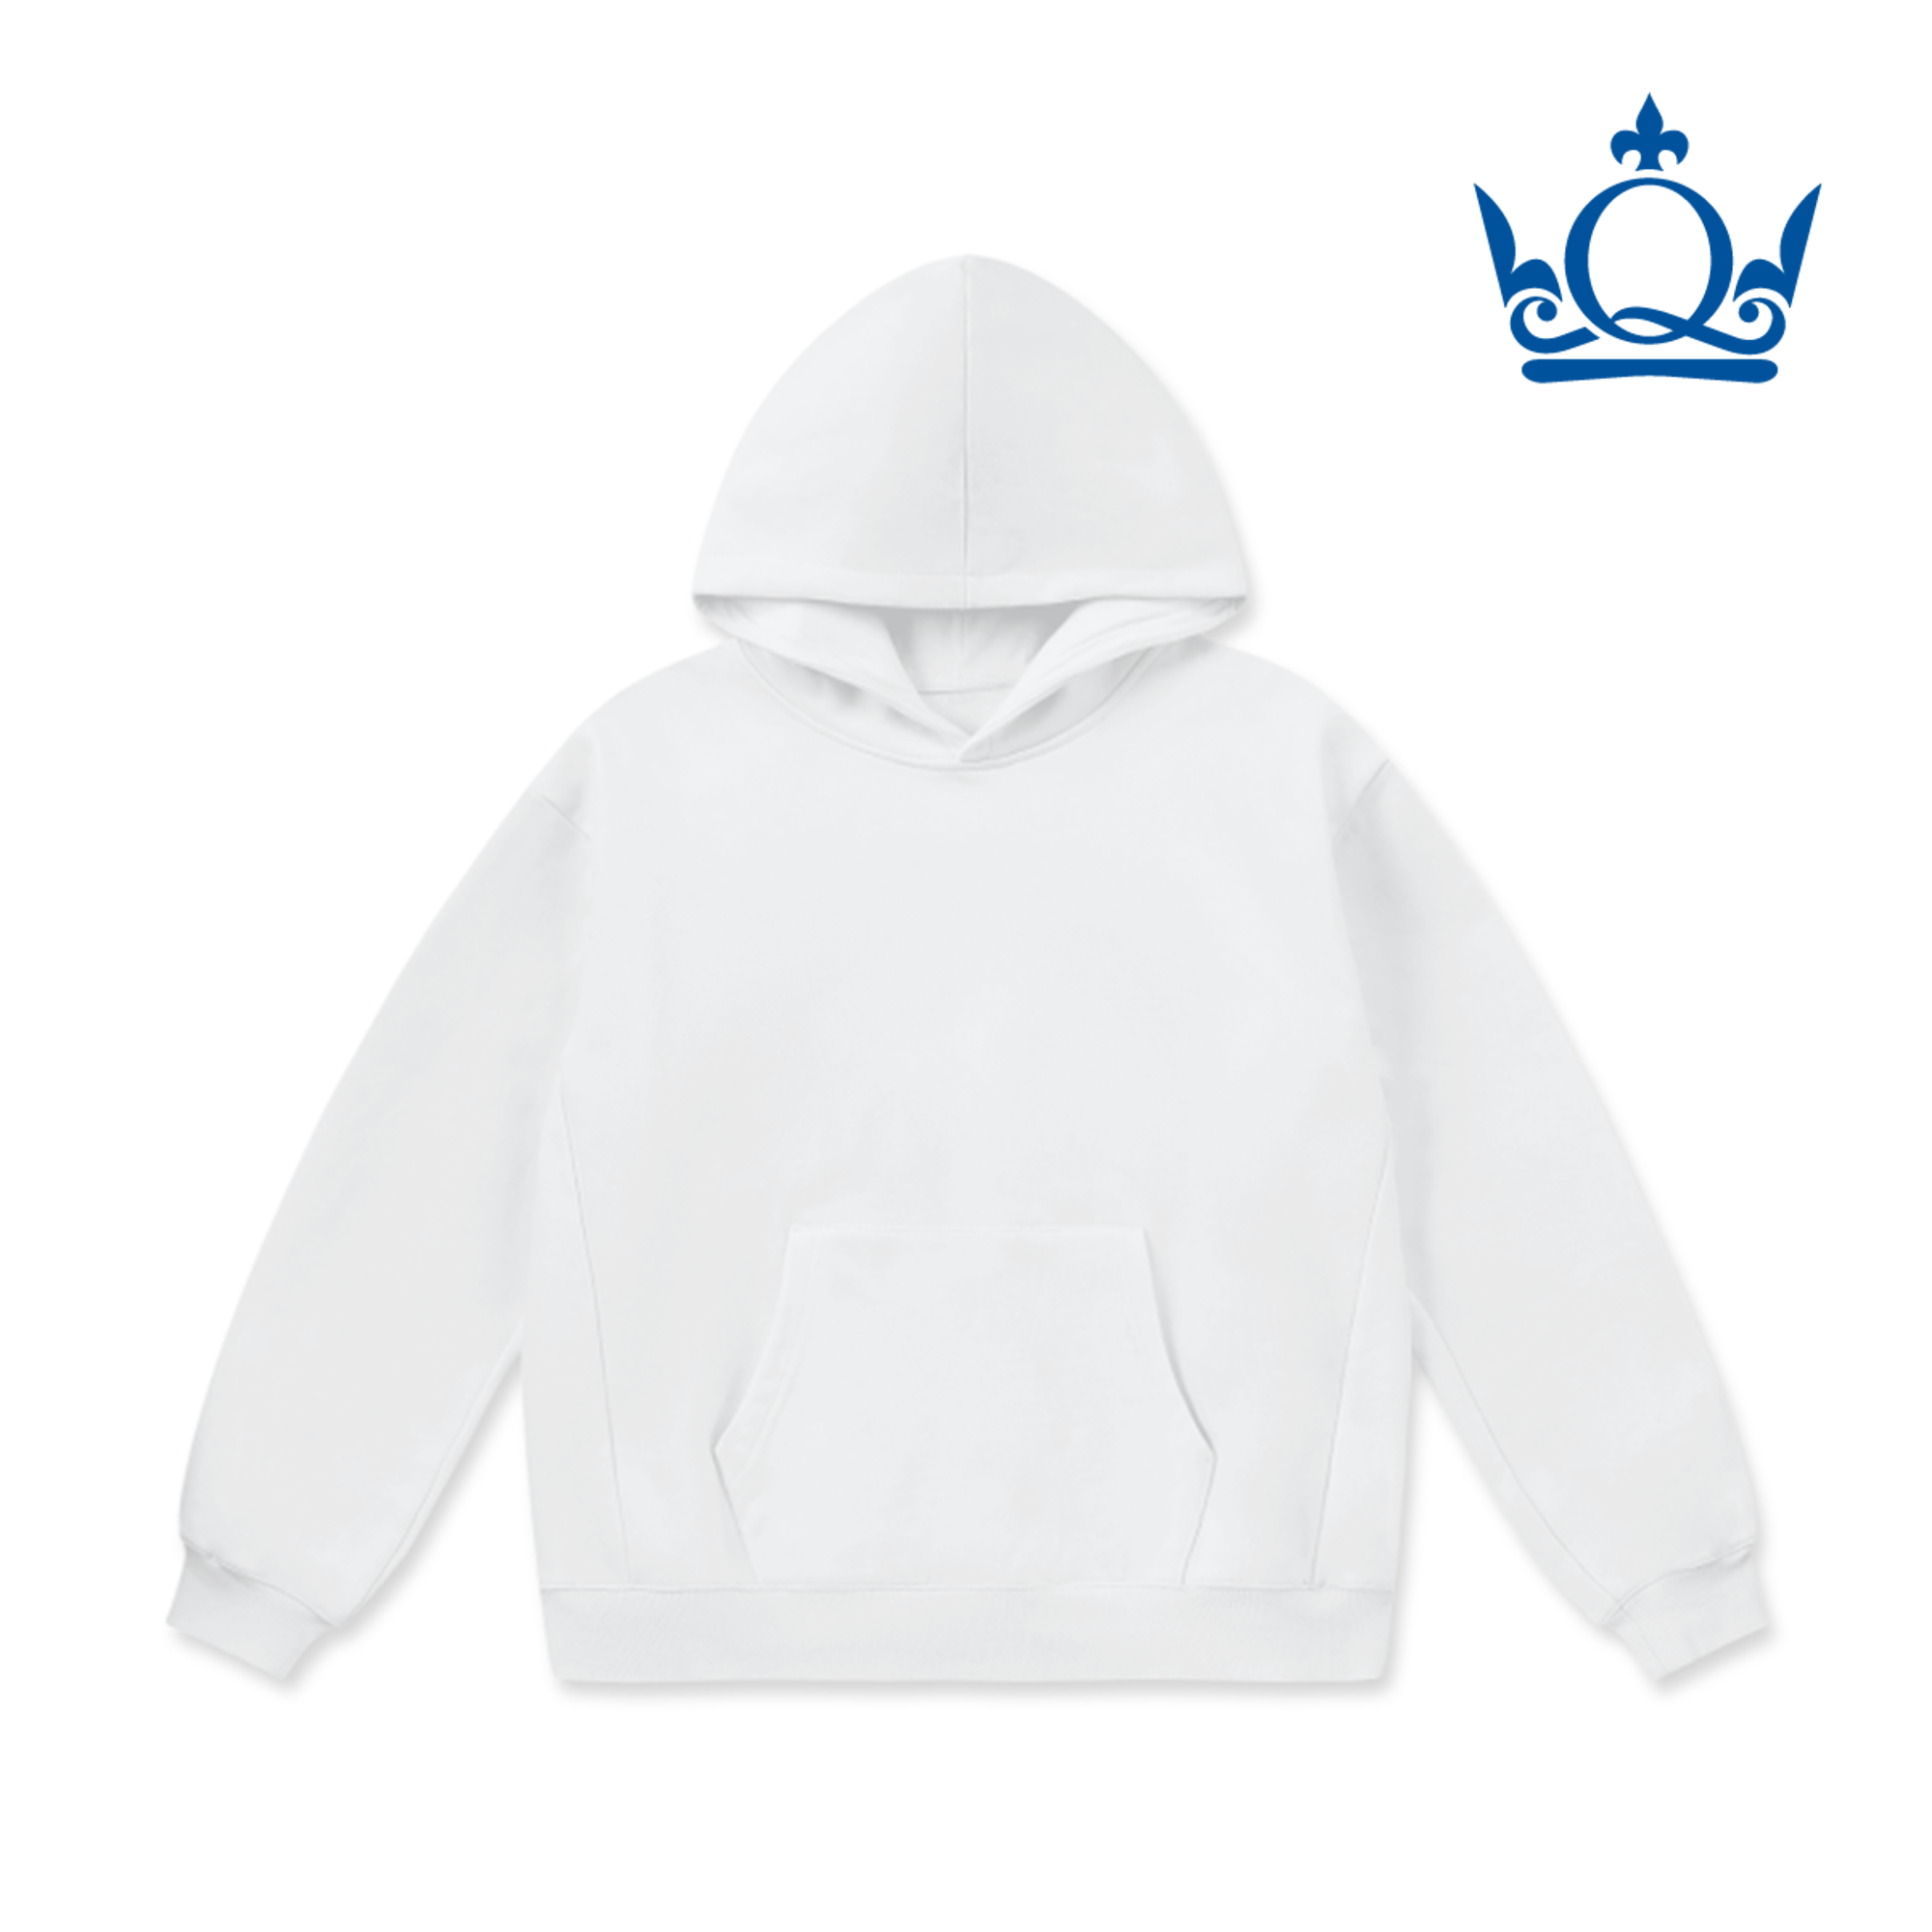 LCC Super Weighted Hoodie - Queen Mary University of London (Classic Ver.2)